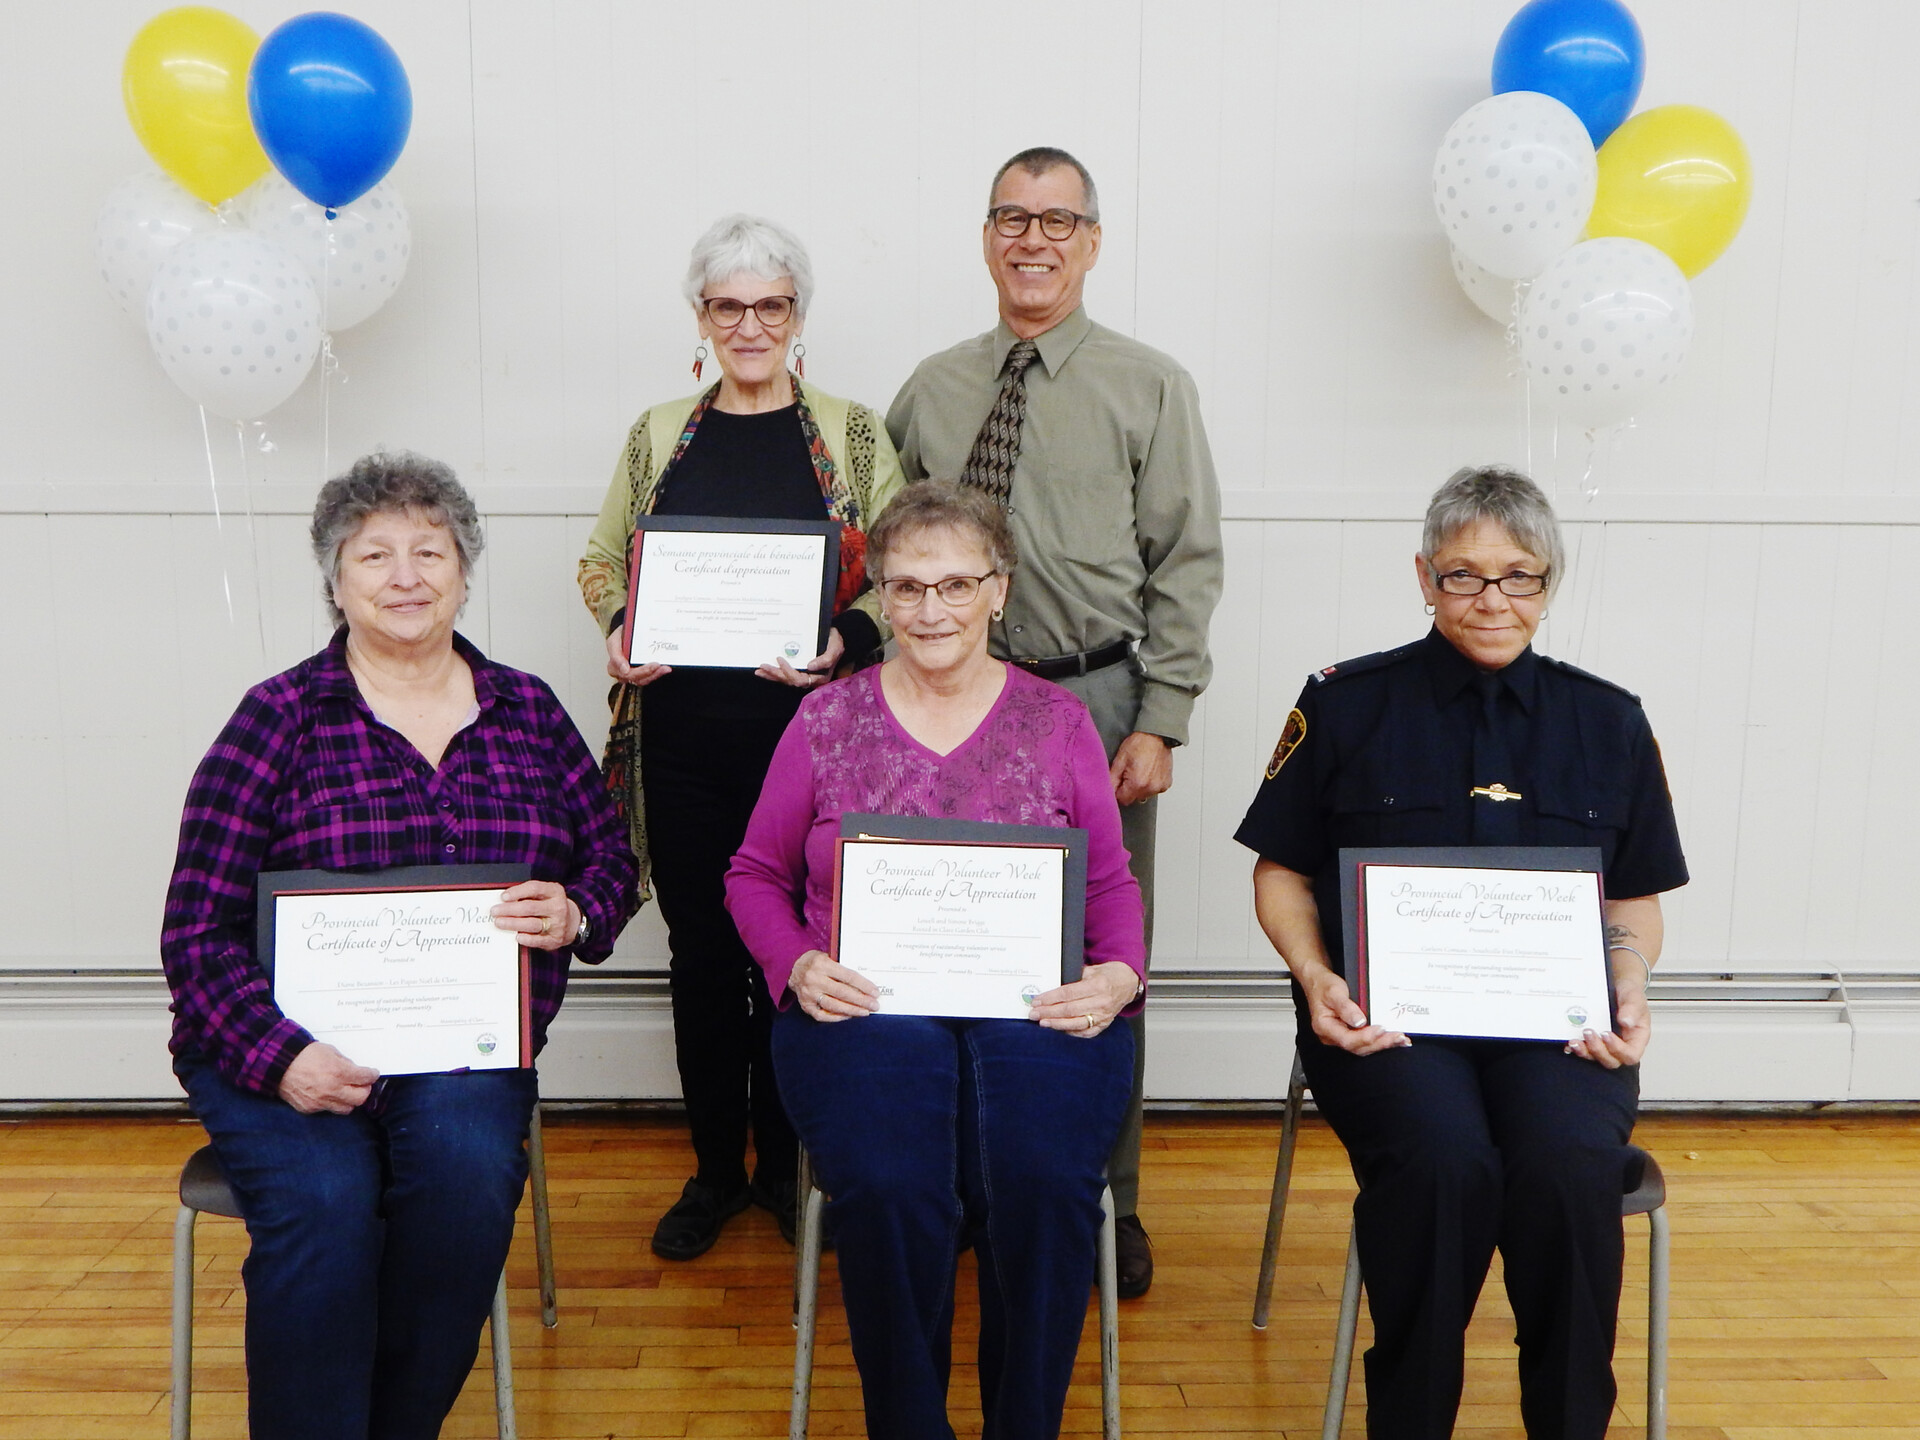 Clare Volunteer Award recipients for 2022 Back row, left to right: Jocelyne Comeau and Councillor Carl Deveau Front row, left to right: Diane Bezanson, Lowell (absent) and Simone Briggs, Carleen Comeau Absent: Suzanne Aucoin, André Belliveau, Camilla Blinn and Elizabeth Comeau                                                                                                       